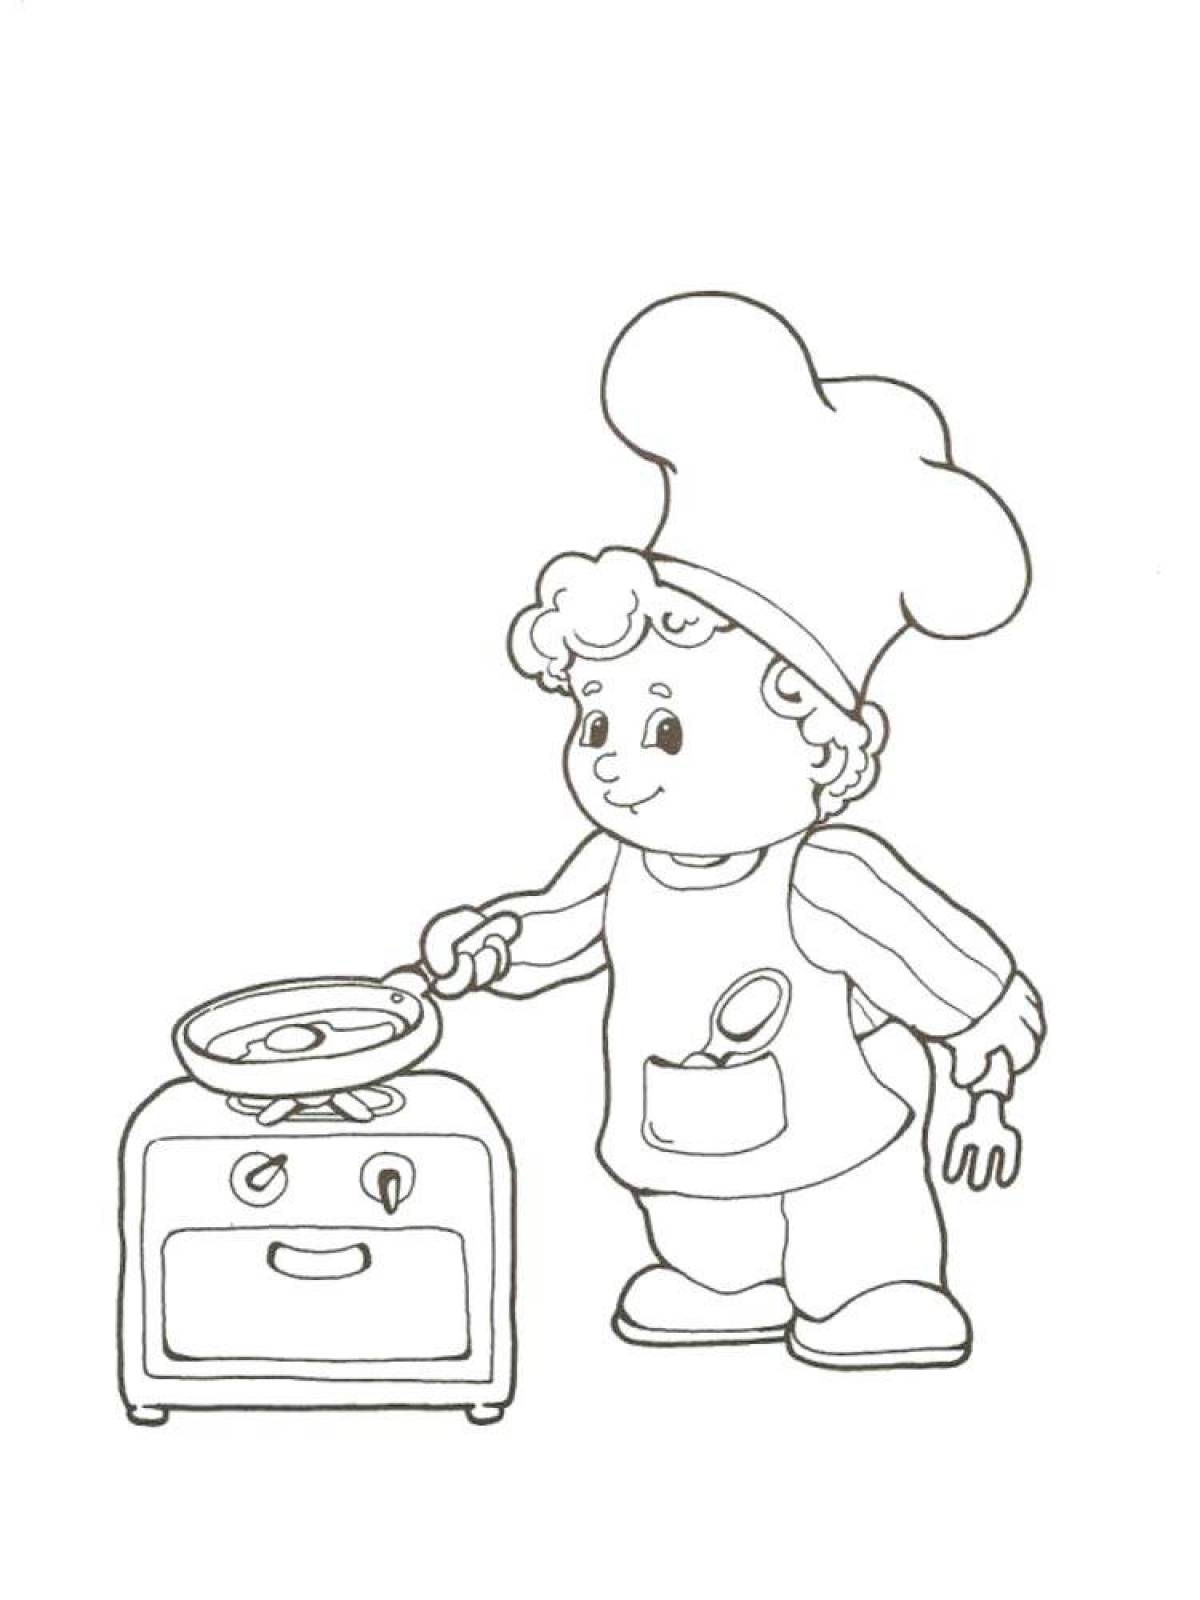 Colourful coloring of the cook for children